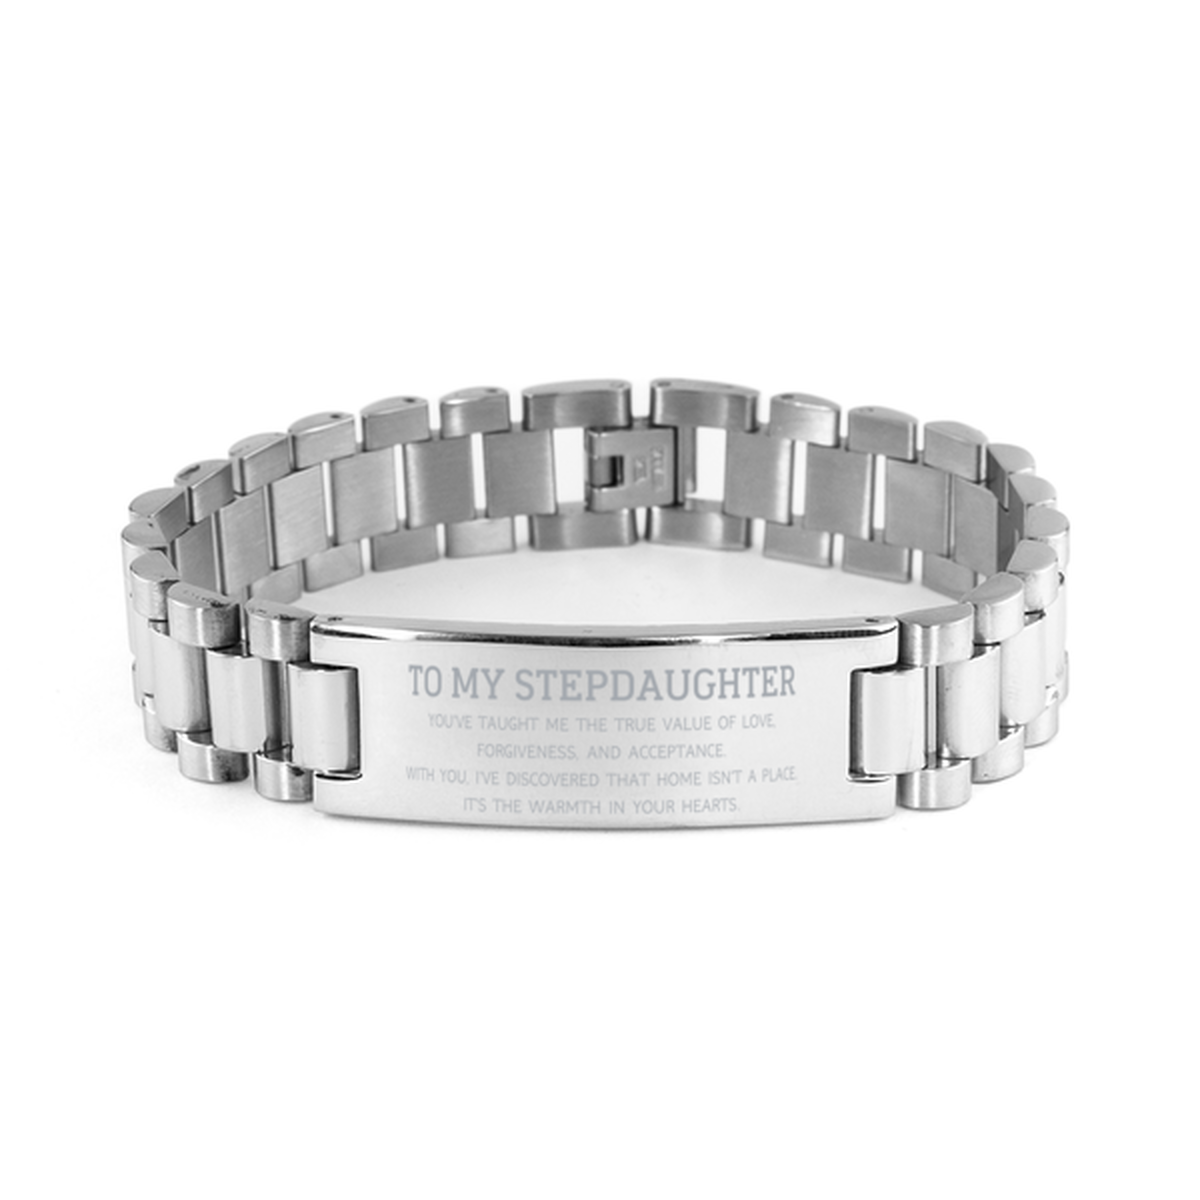 To My Stepdaughter Gifts, You've taught me the true value of love, Thank You Gifts For Stepdaughter, Birthday Ladder Stainless Steel Bracelet For Stepdaughter